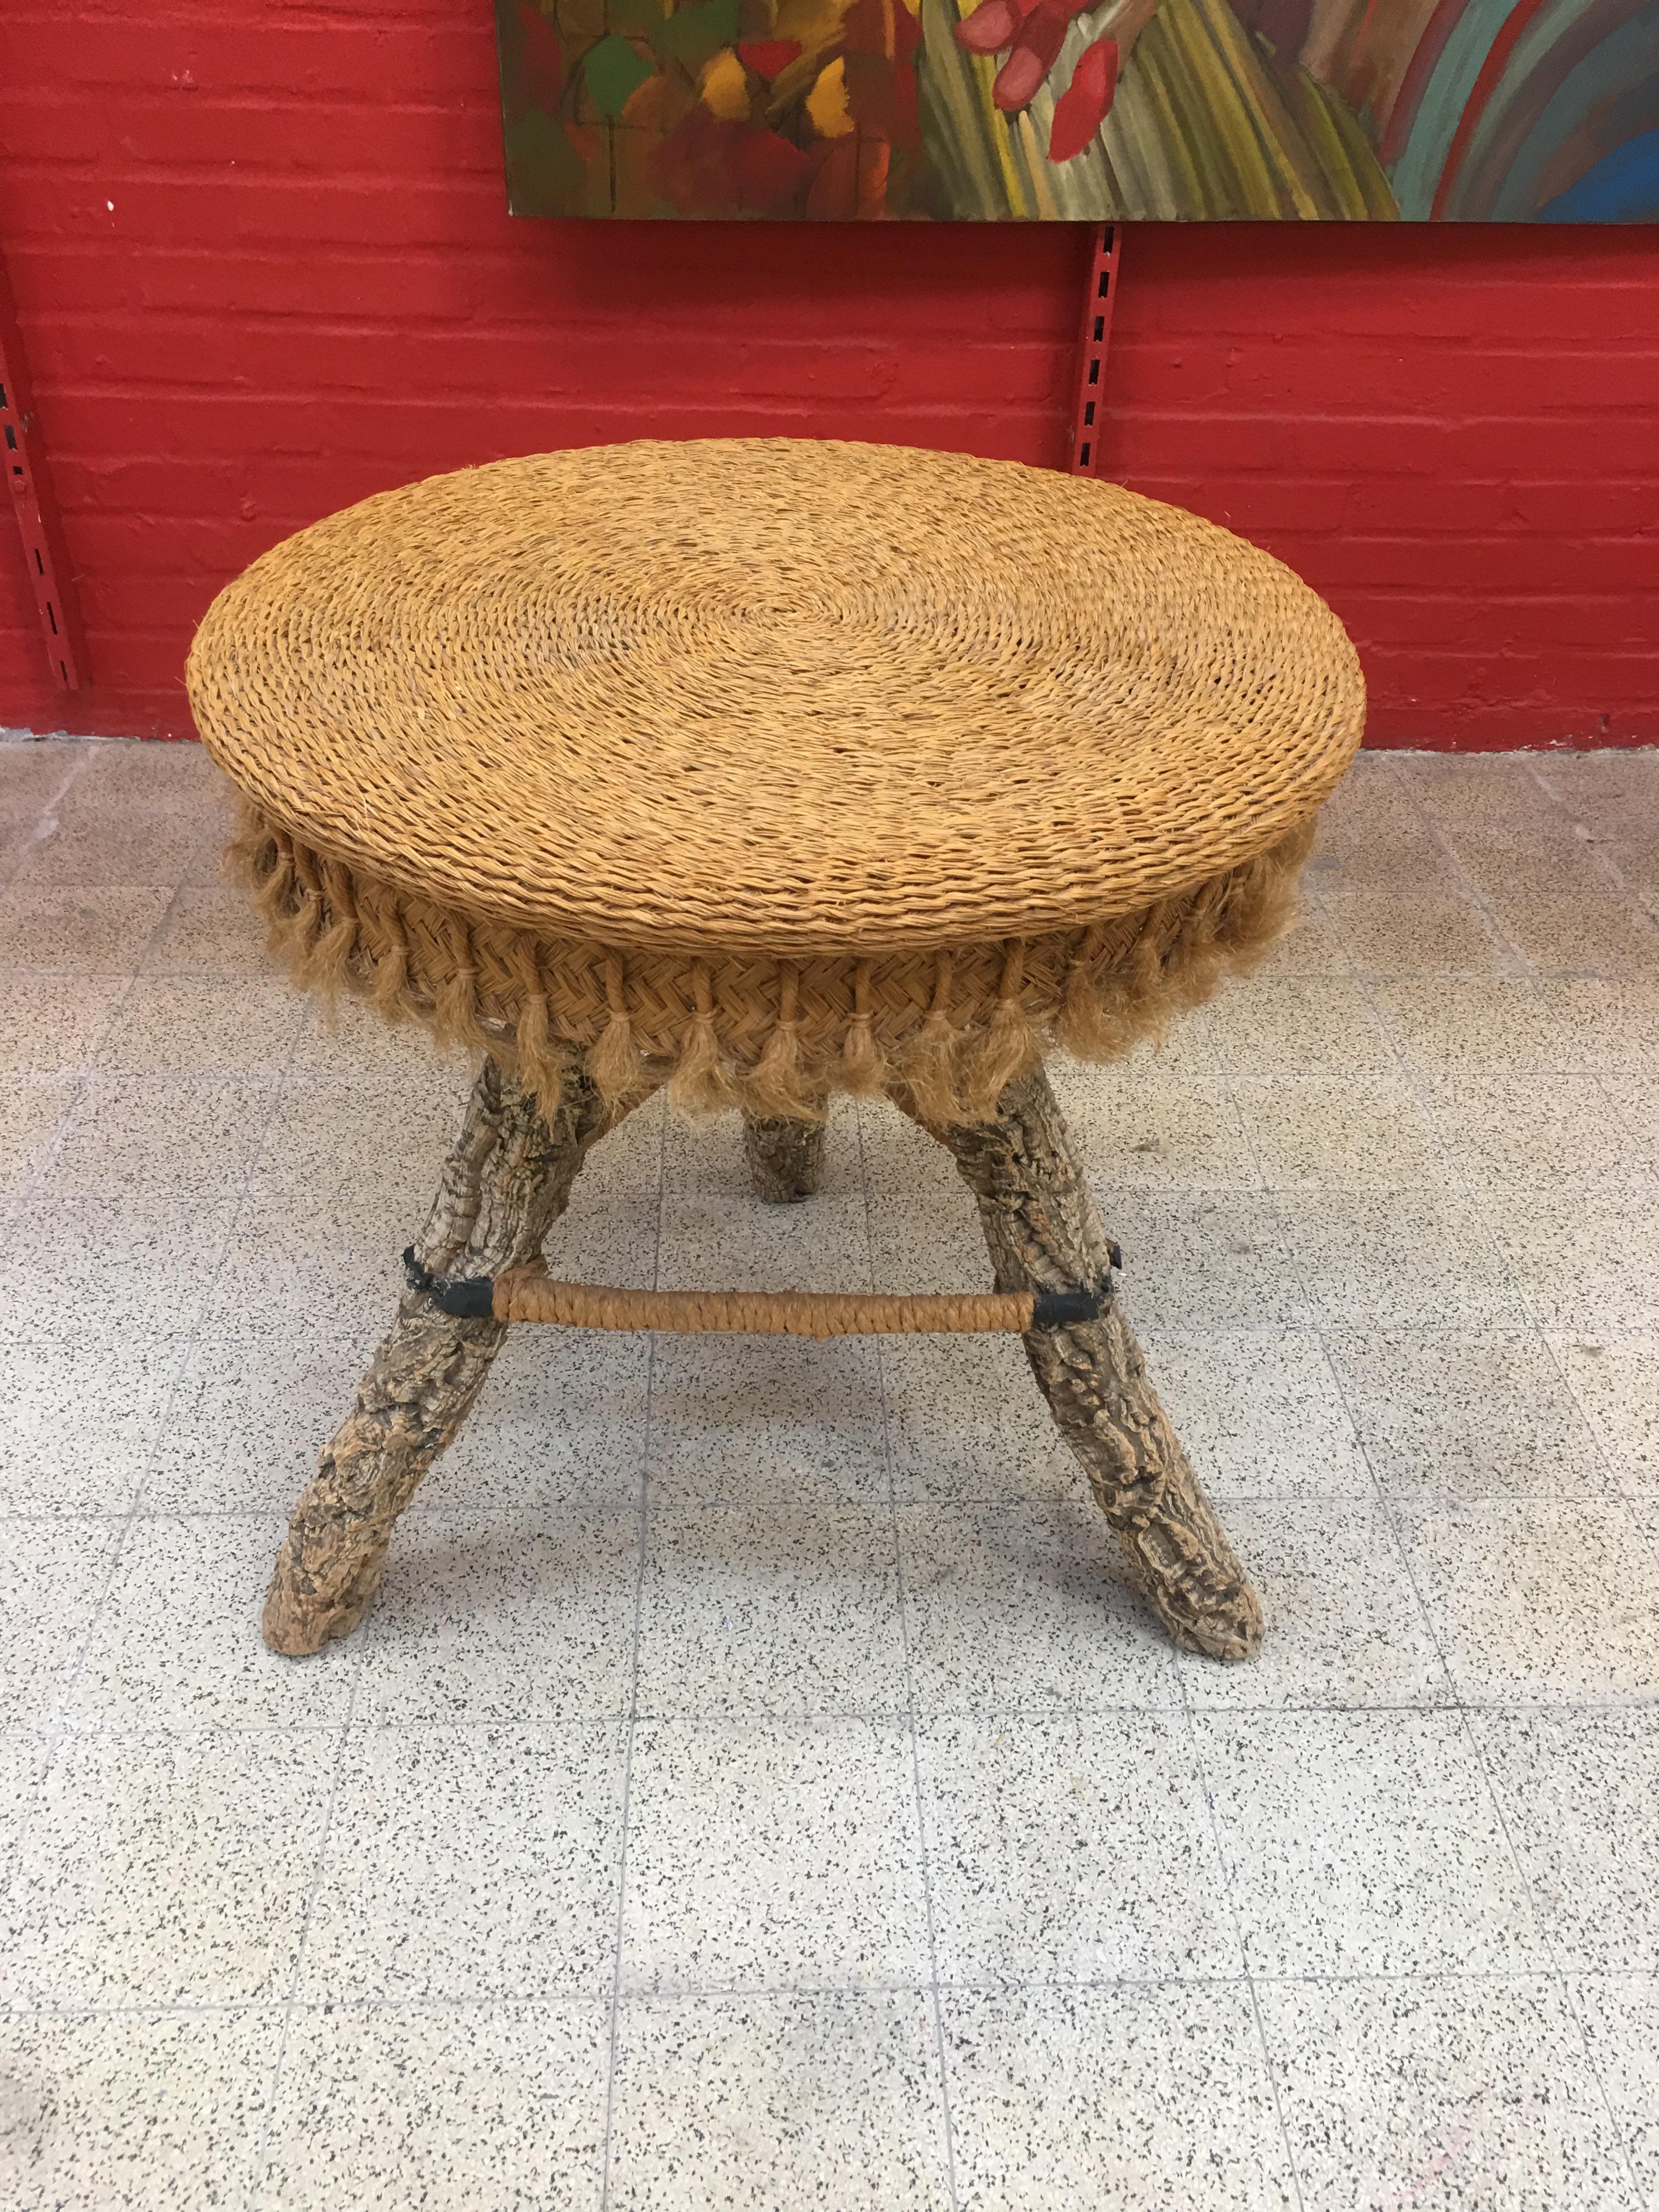 Organic Table and Its 4 Stools, Rattan, Rafia, Rope and Branches, circa 1970 For Sale 11